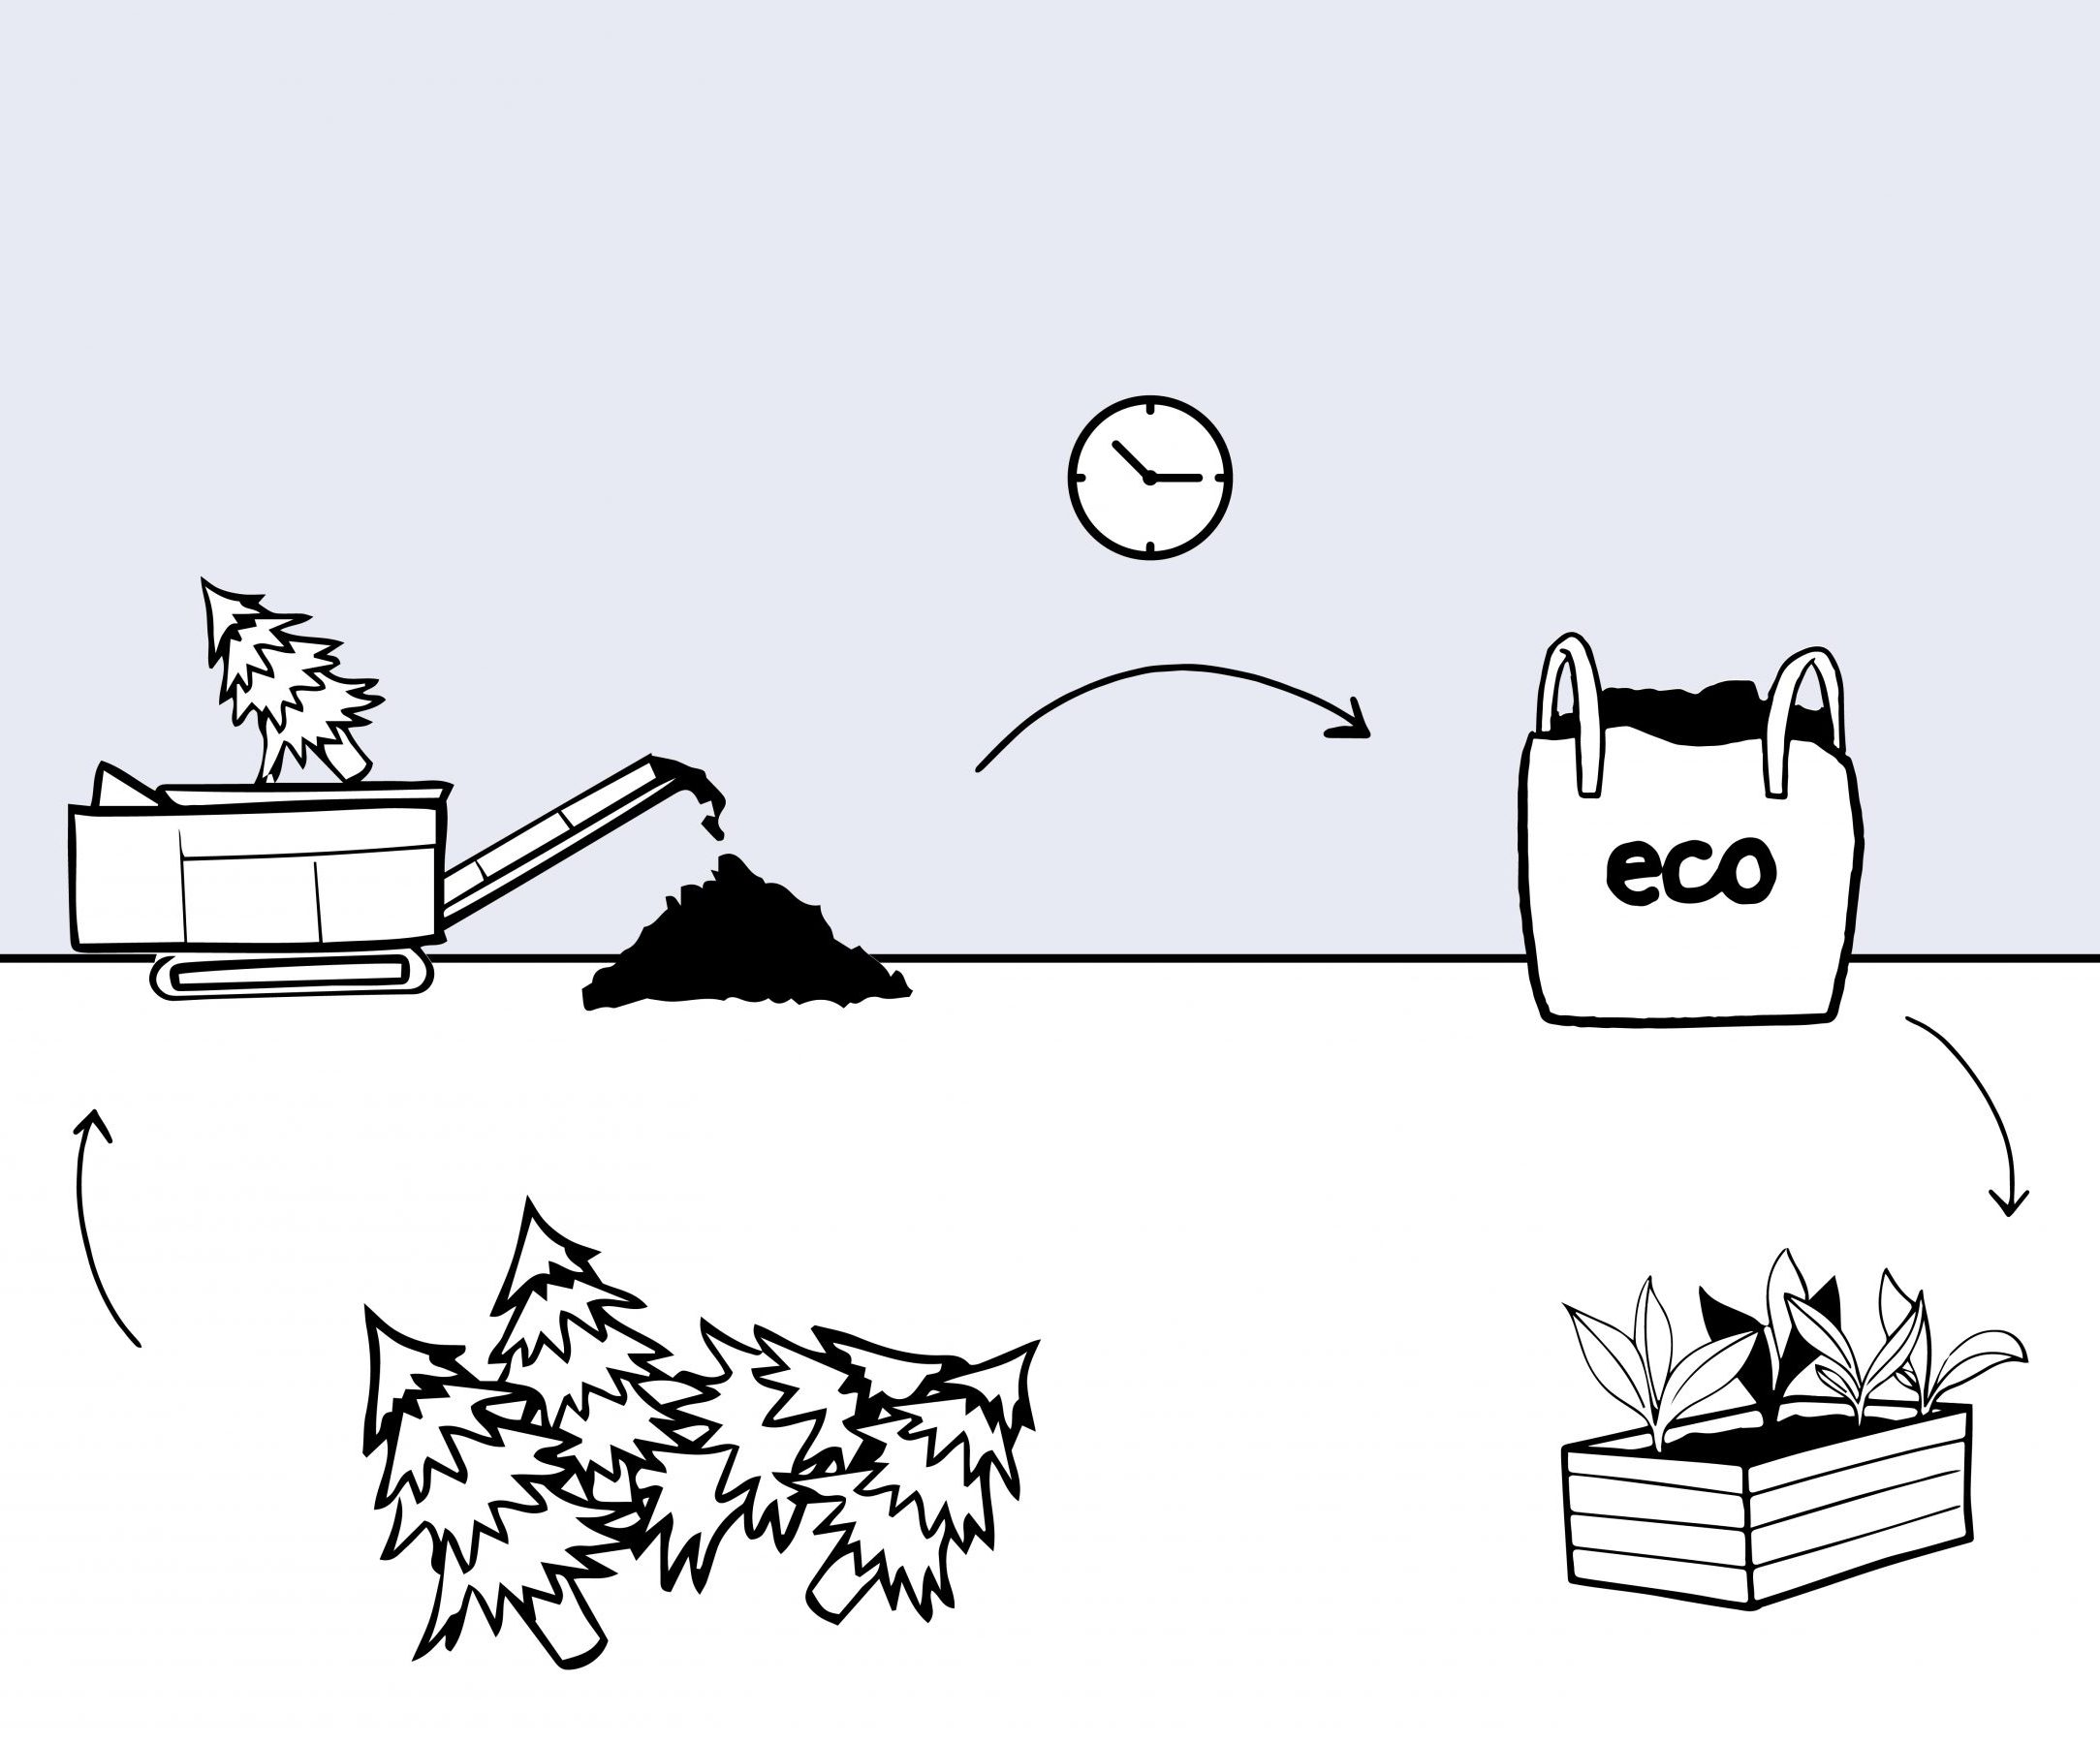 image shows an illustration of the open windrow composting process